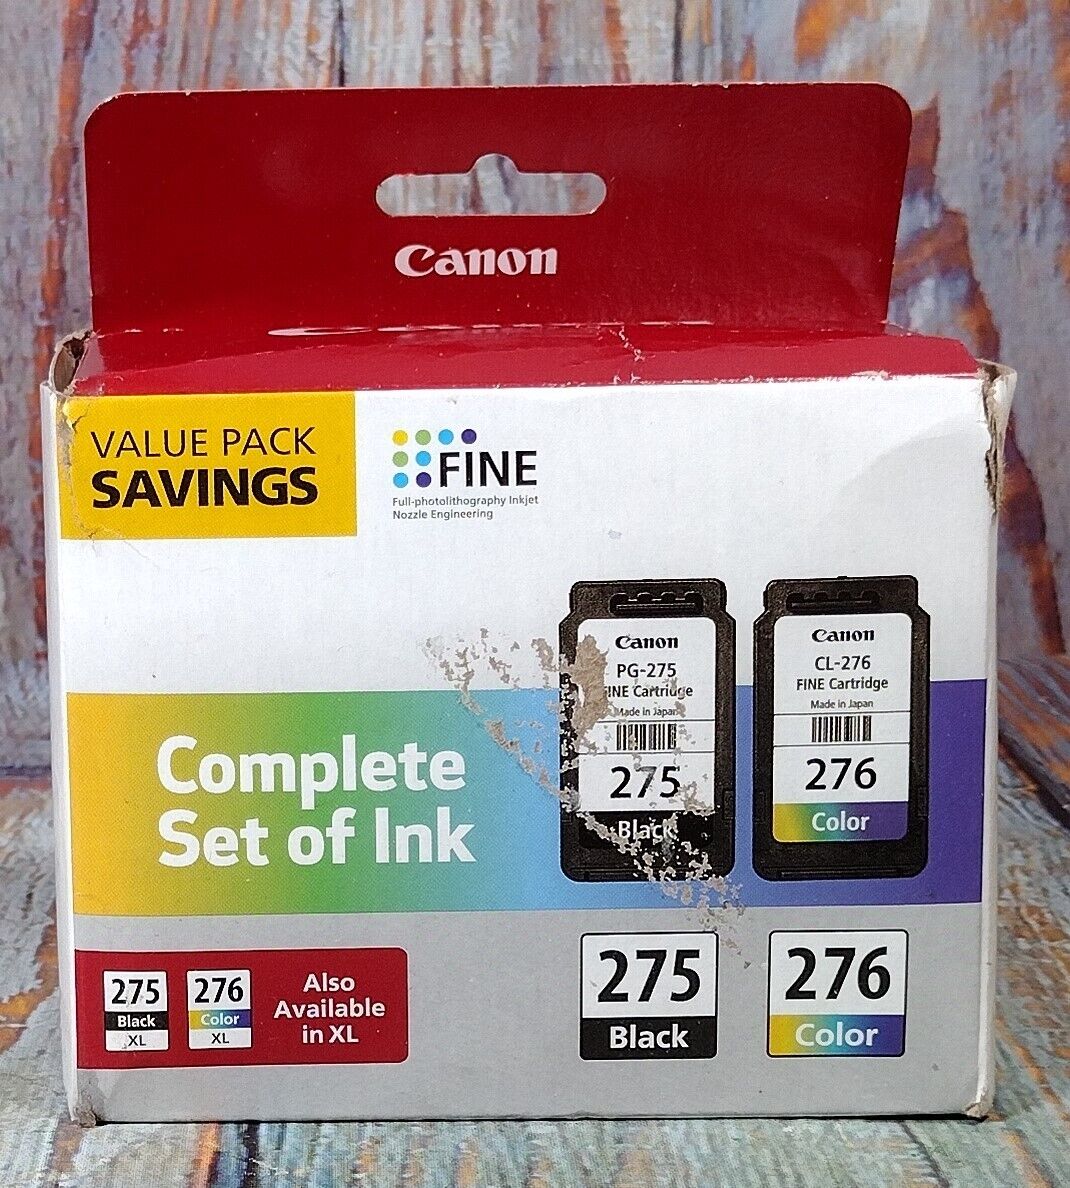 Canon Complete Set of Ink - 275 Black / 276 Color - BRAND NEW